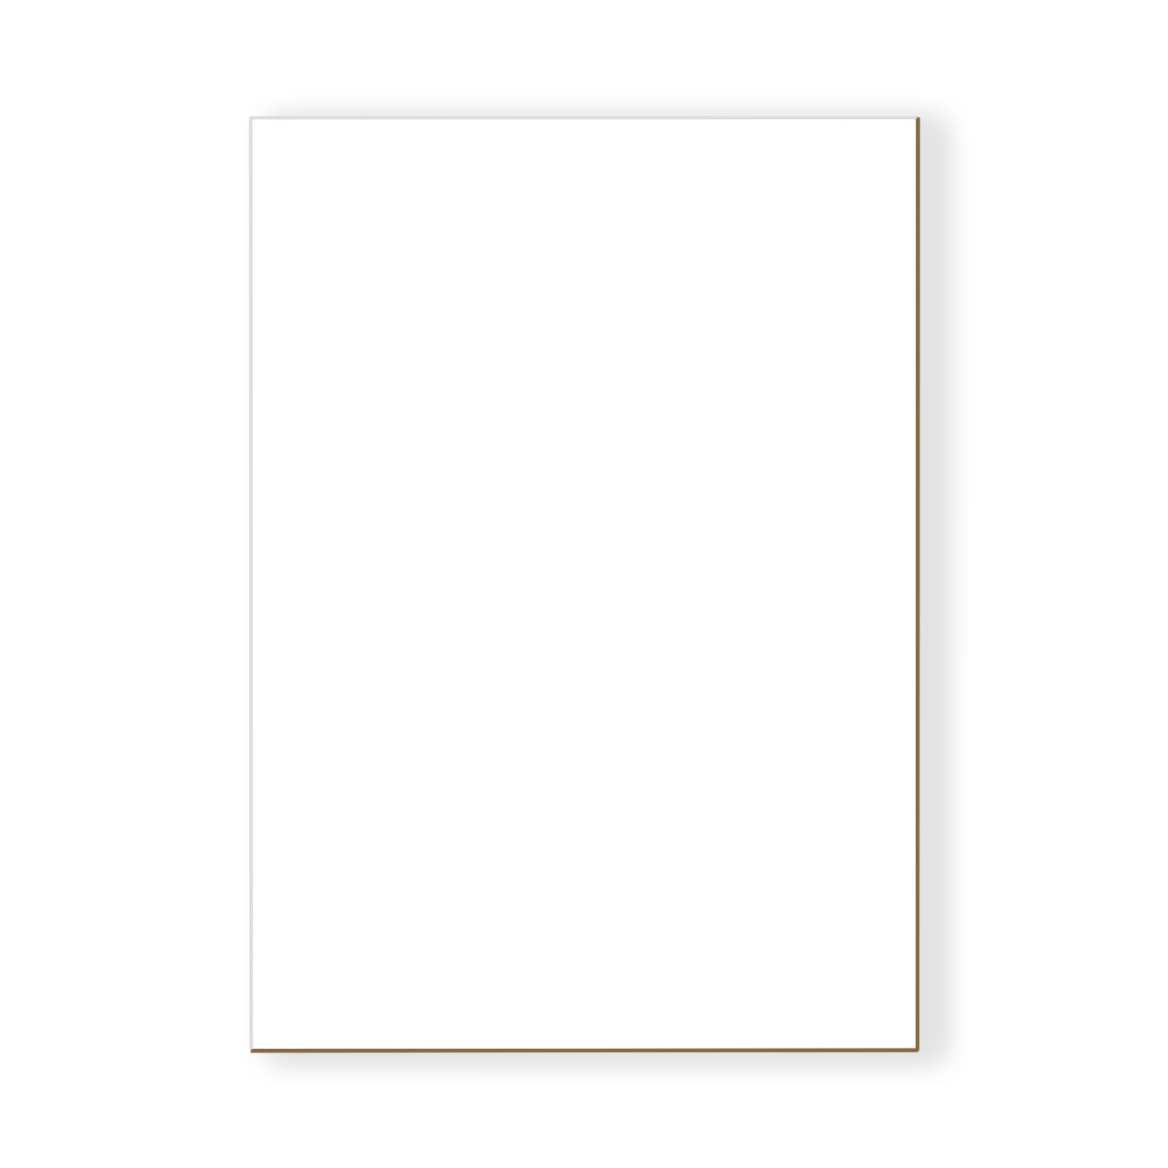  Mat Board Center, Pack of 10, 18x24 Uncut White Color Mats Mat  Boards - Acid Free, 4-Ply Thickness, White Core - Great for Pictures,  Photos, Framing Backing